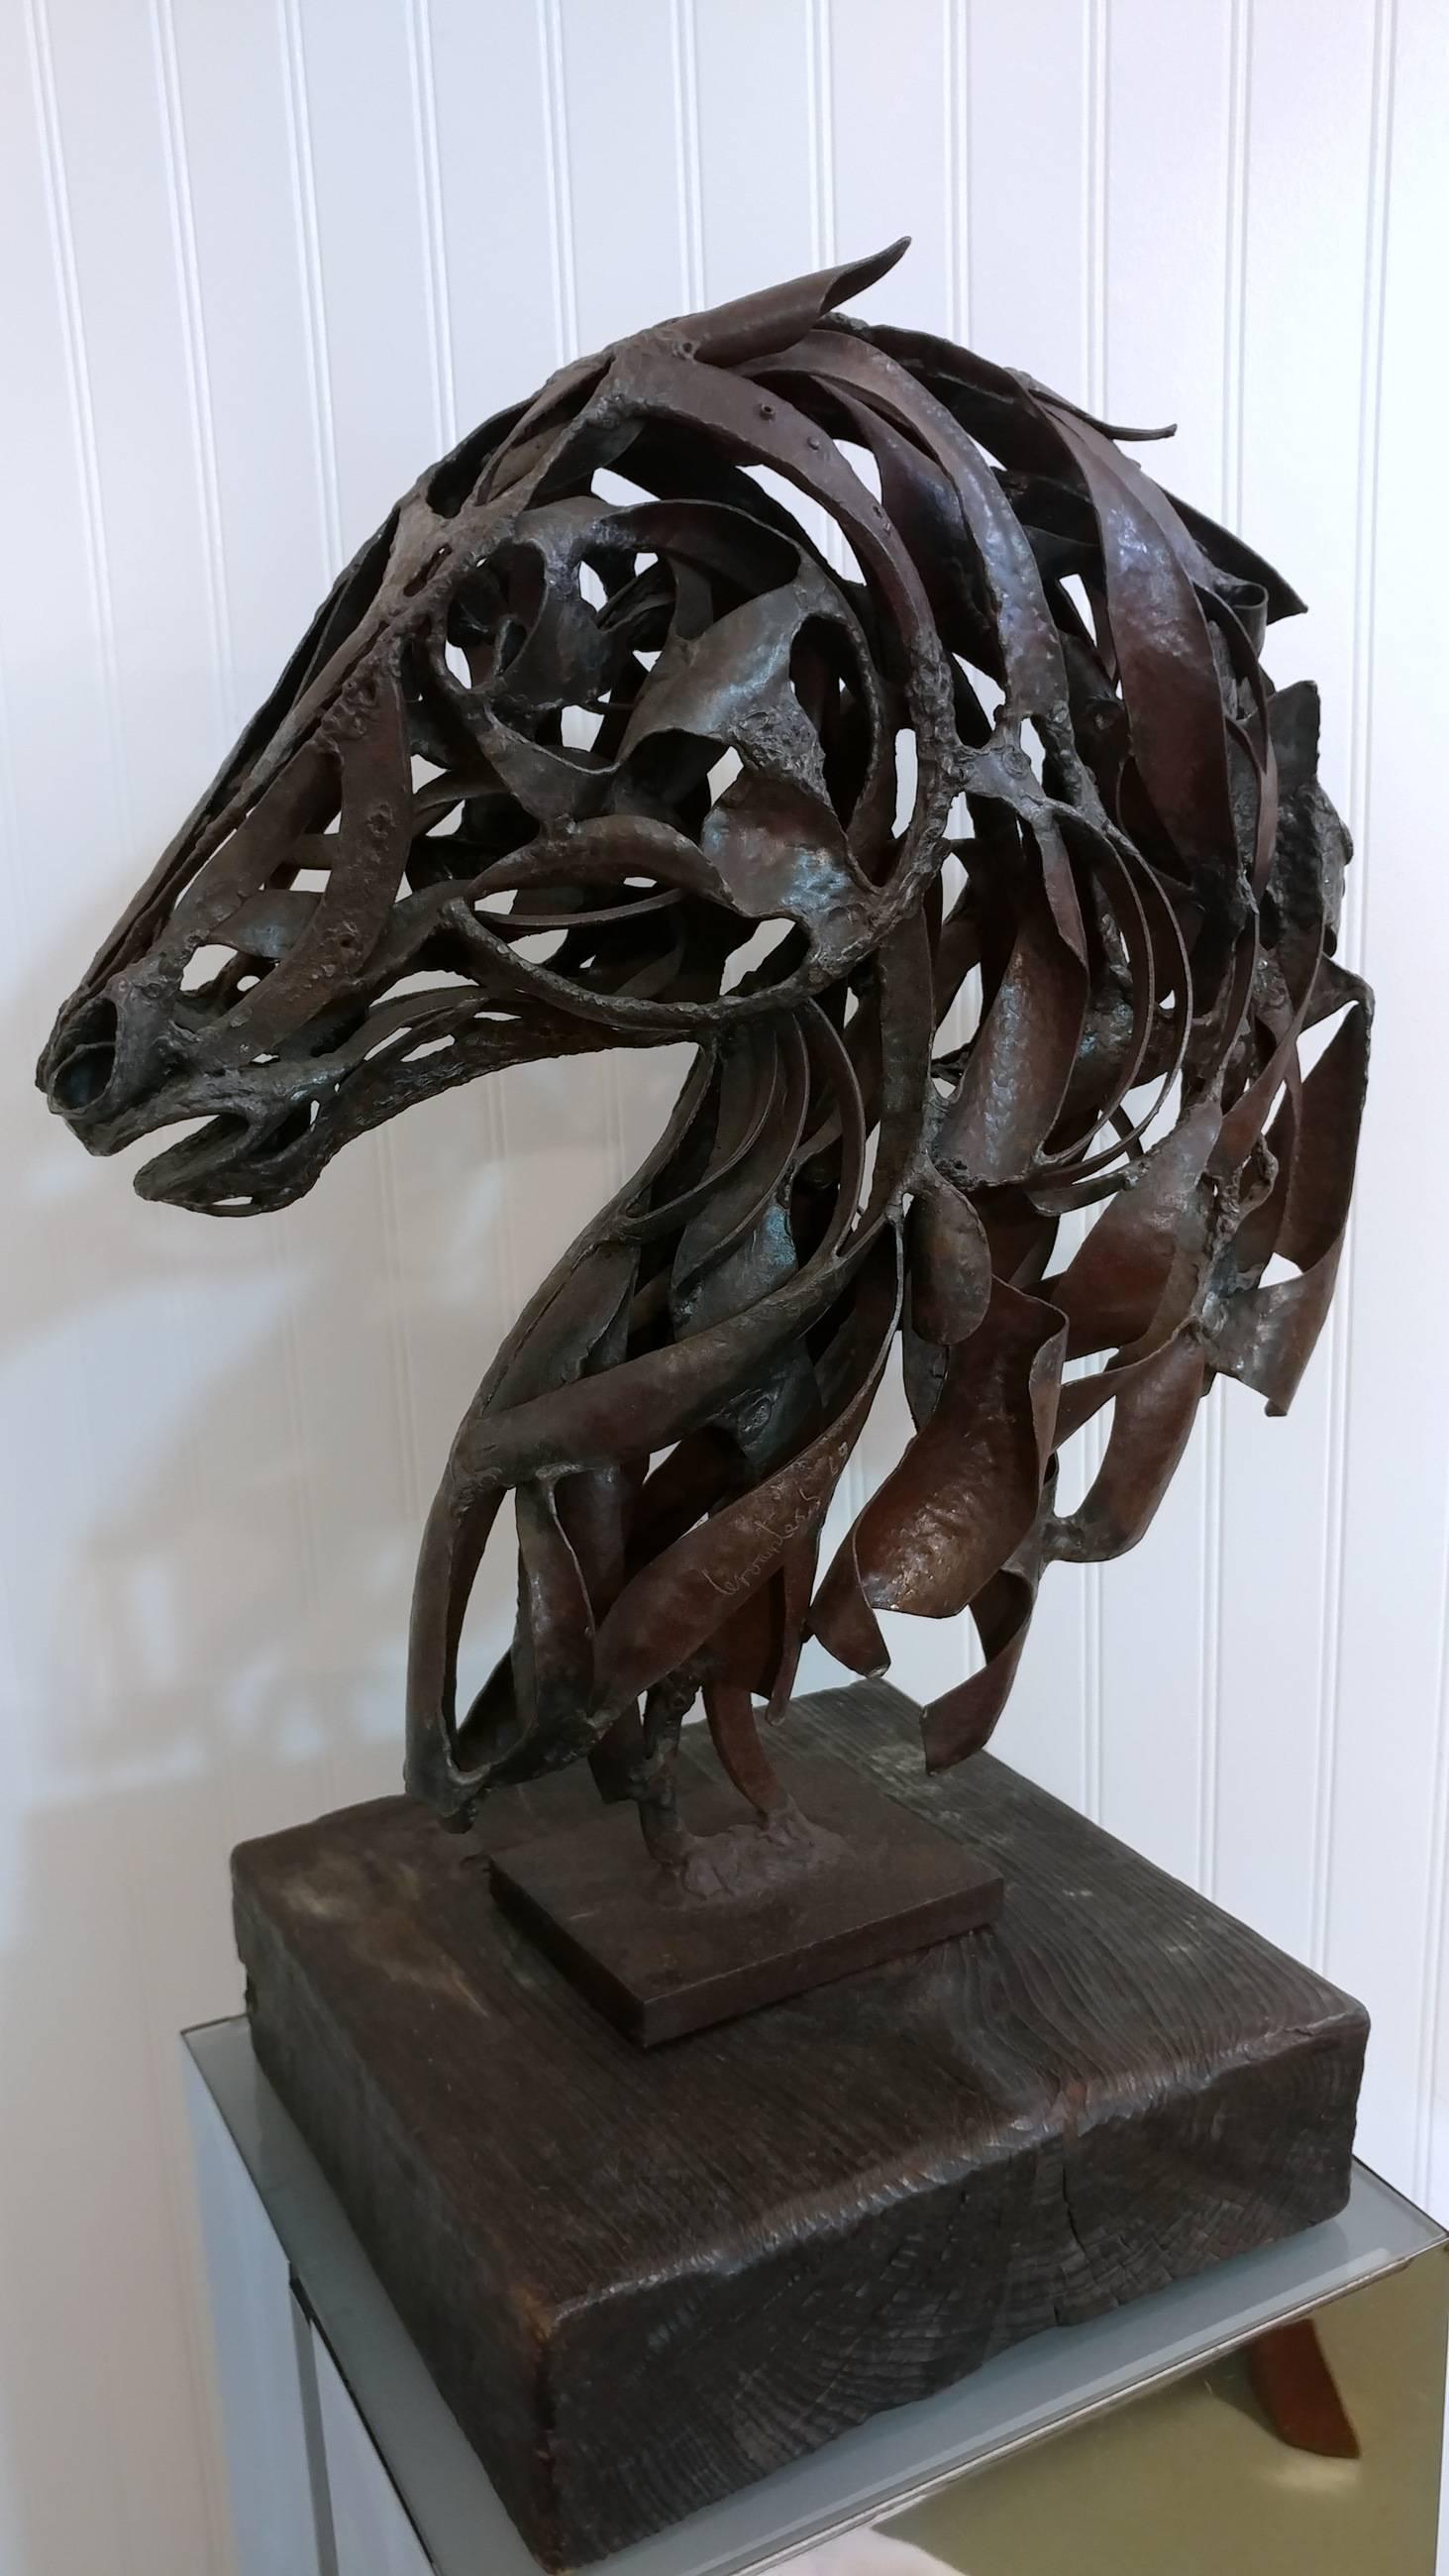 An early work by artist Pedro Miguel de Cervantes Salvadores. Since childhood he has been fascinaed by horses. This horse bust sculpture is a fine example and displays lively energy from any angle, masterfully crafted in wrought iron on solid wood